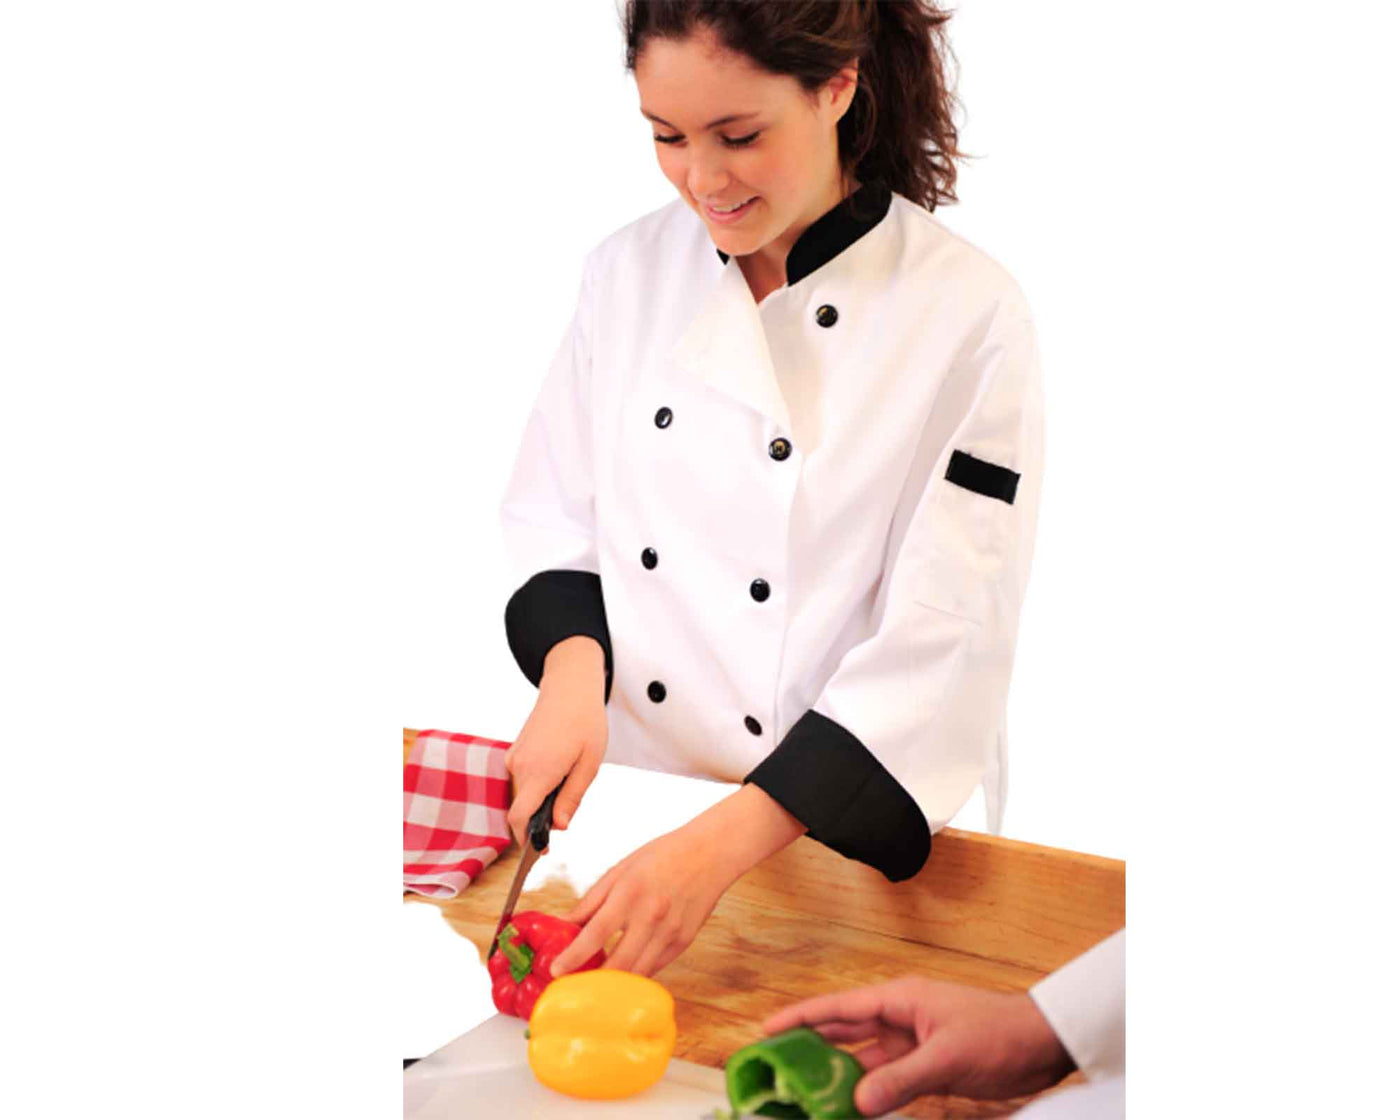 lady wearing white chef coat with black trim cutting vegetables#colour_white